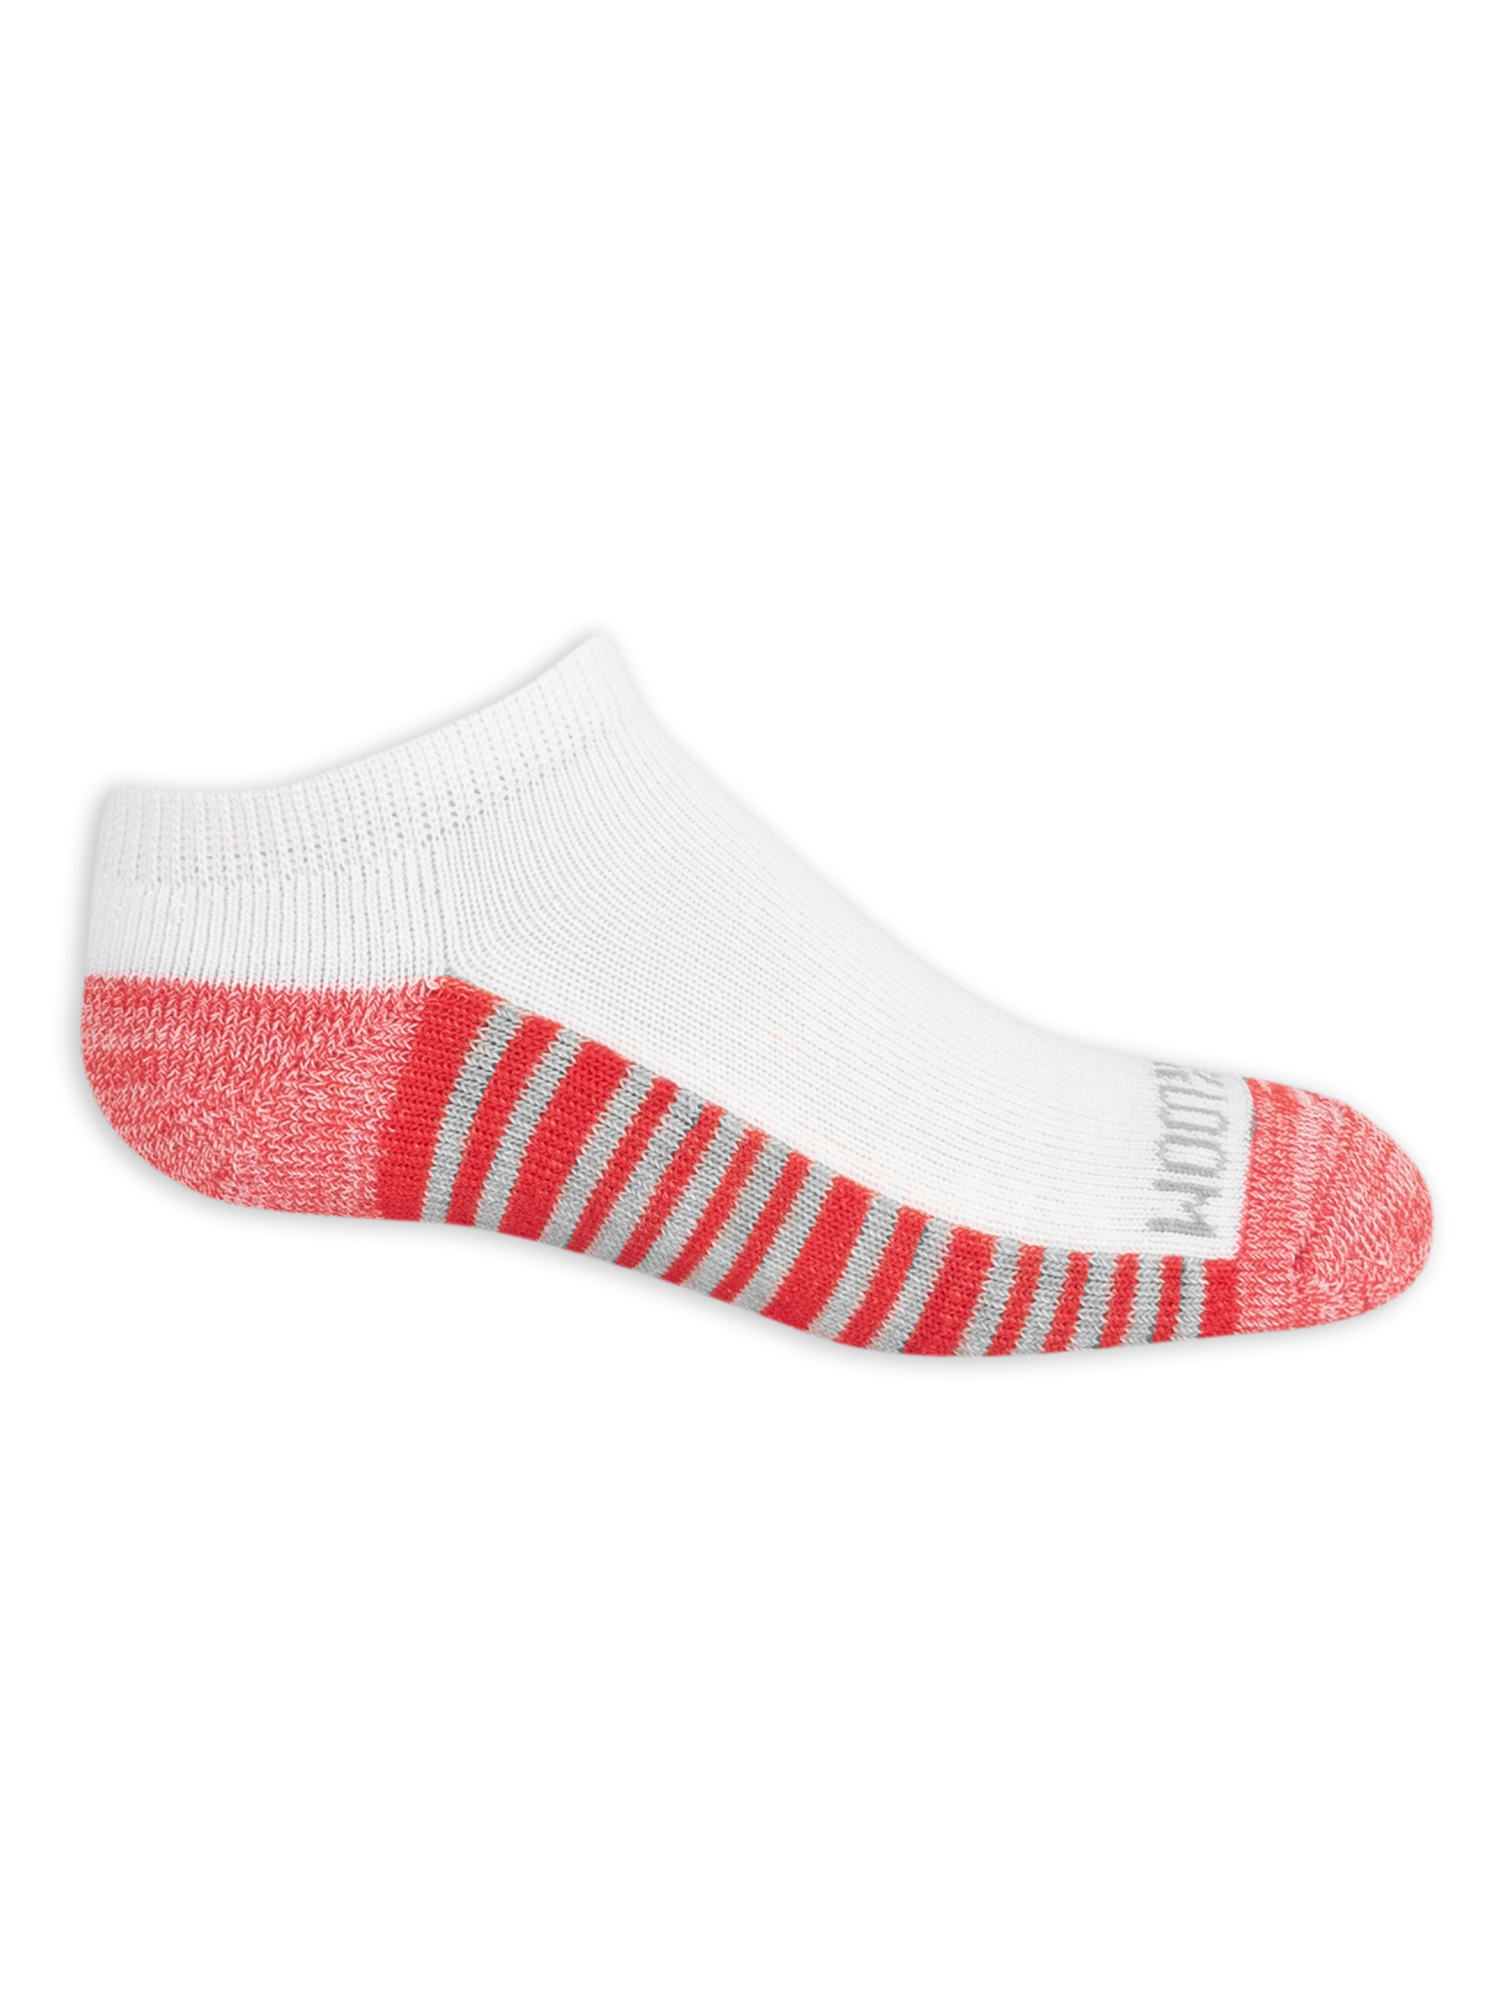 Fruit of the Loom Boys Socks, No Show Zone Cushion 10 Pack Sizes S - L - image 3 of 4